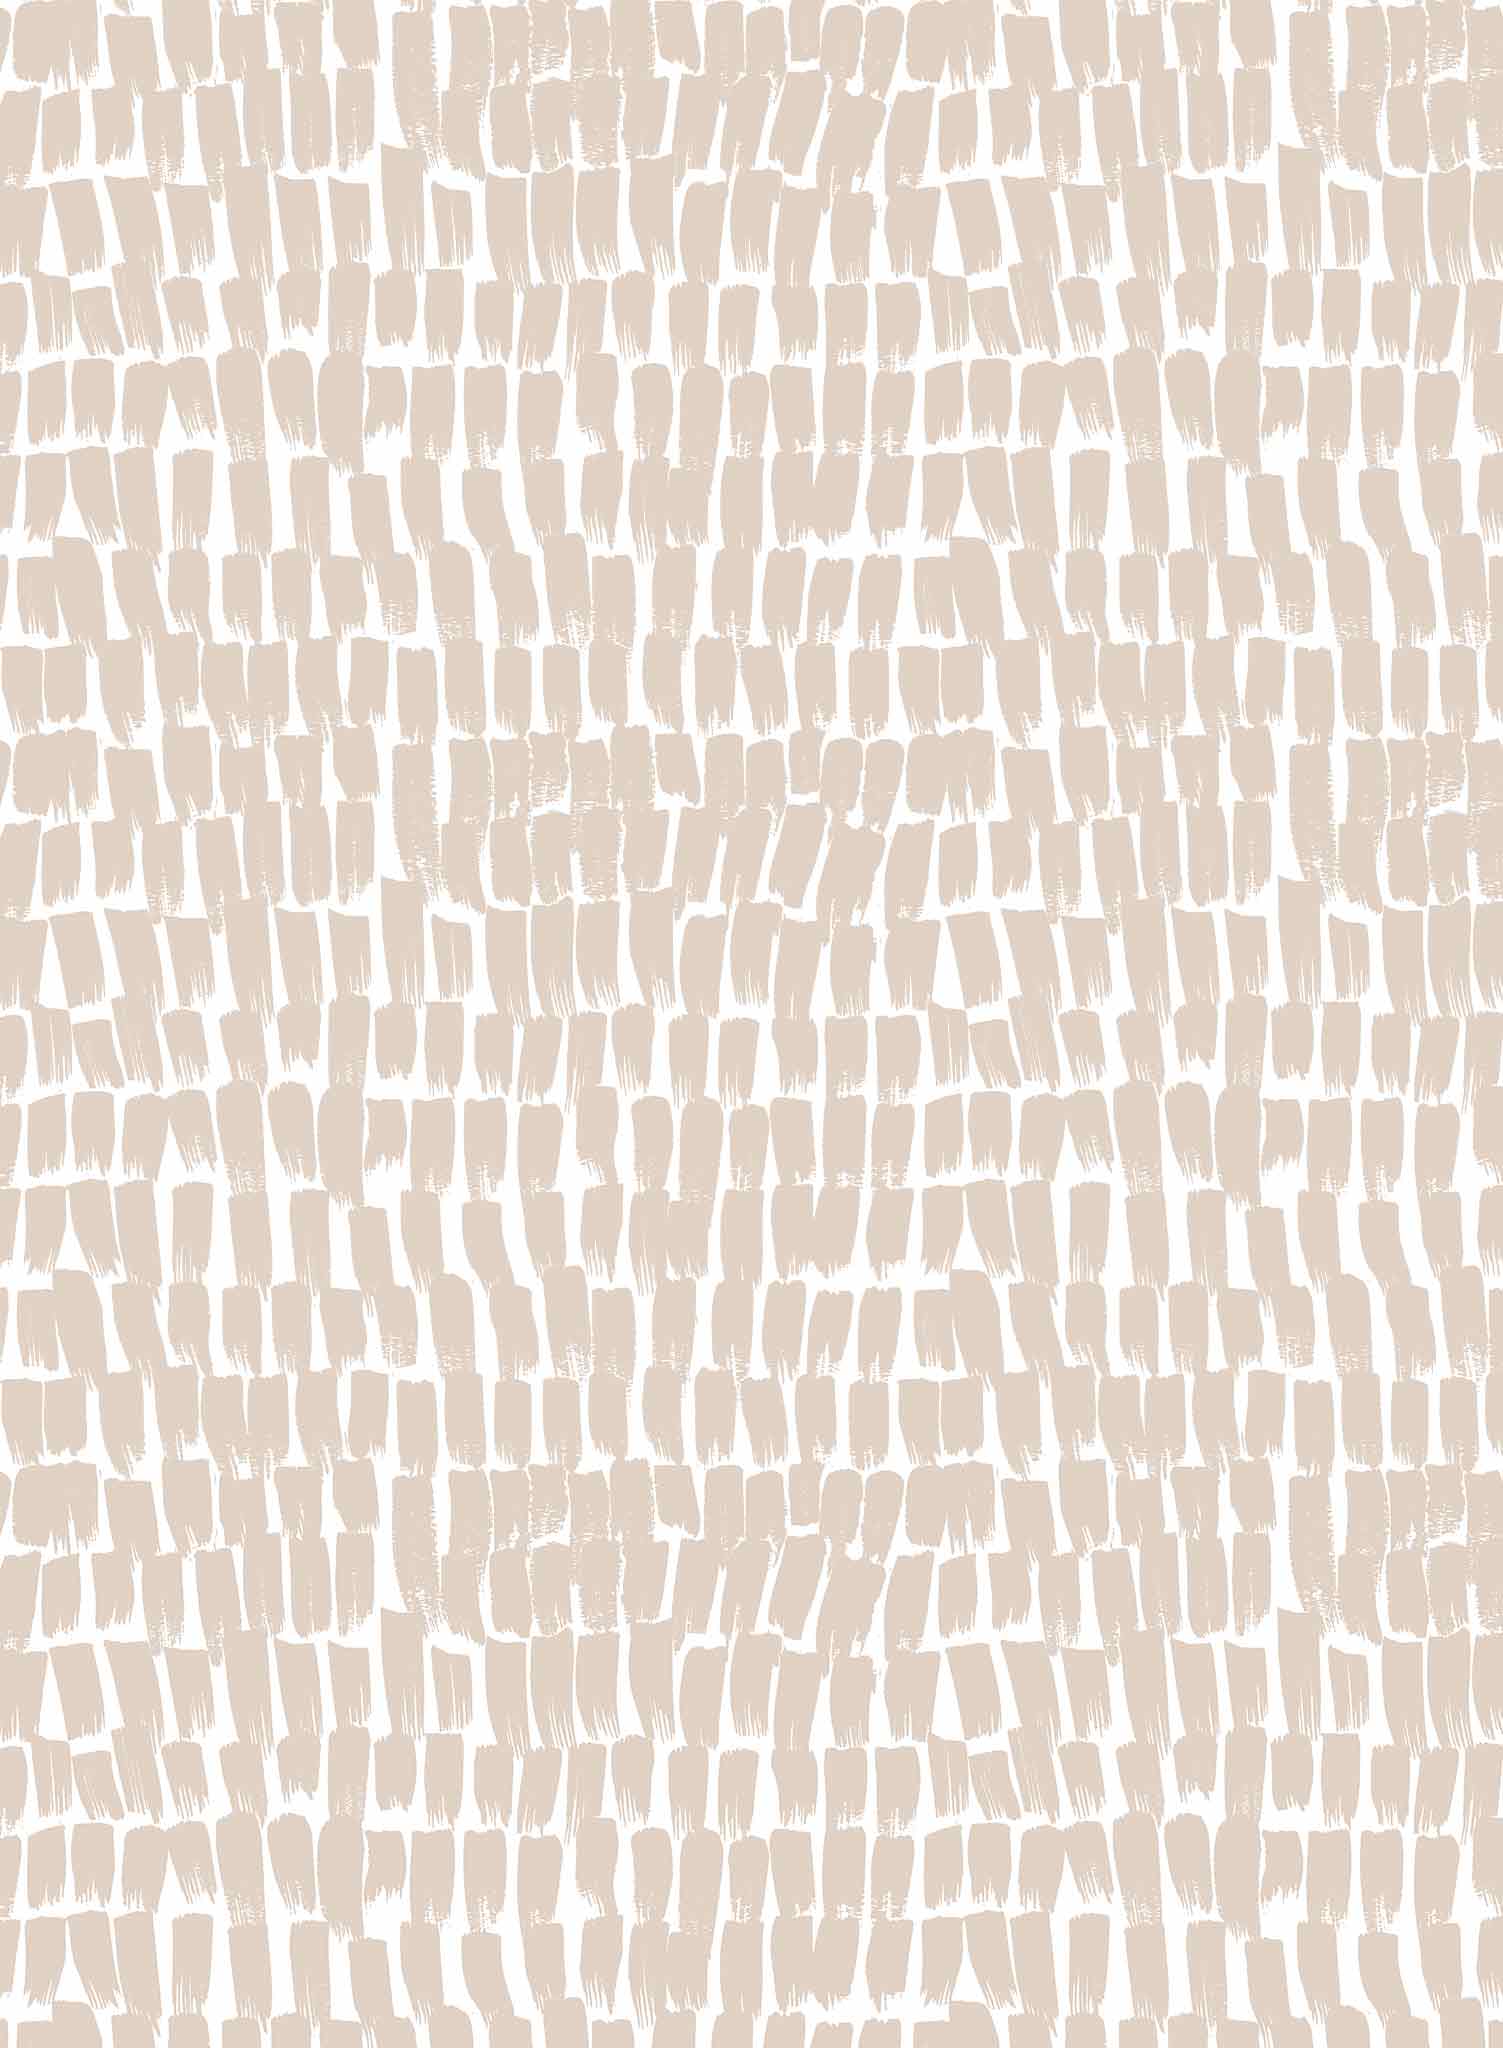 Stroke of Genius is a minimalist wallpaper by Opposite Wall of short vertical brush strokes.